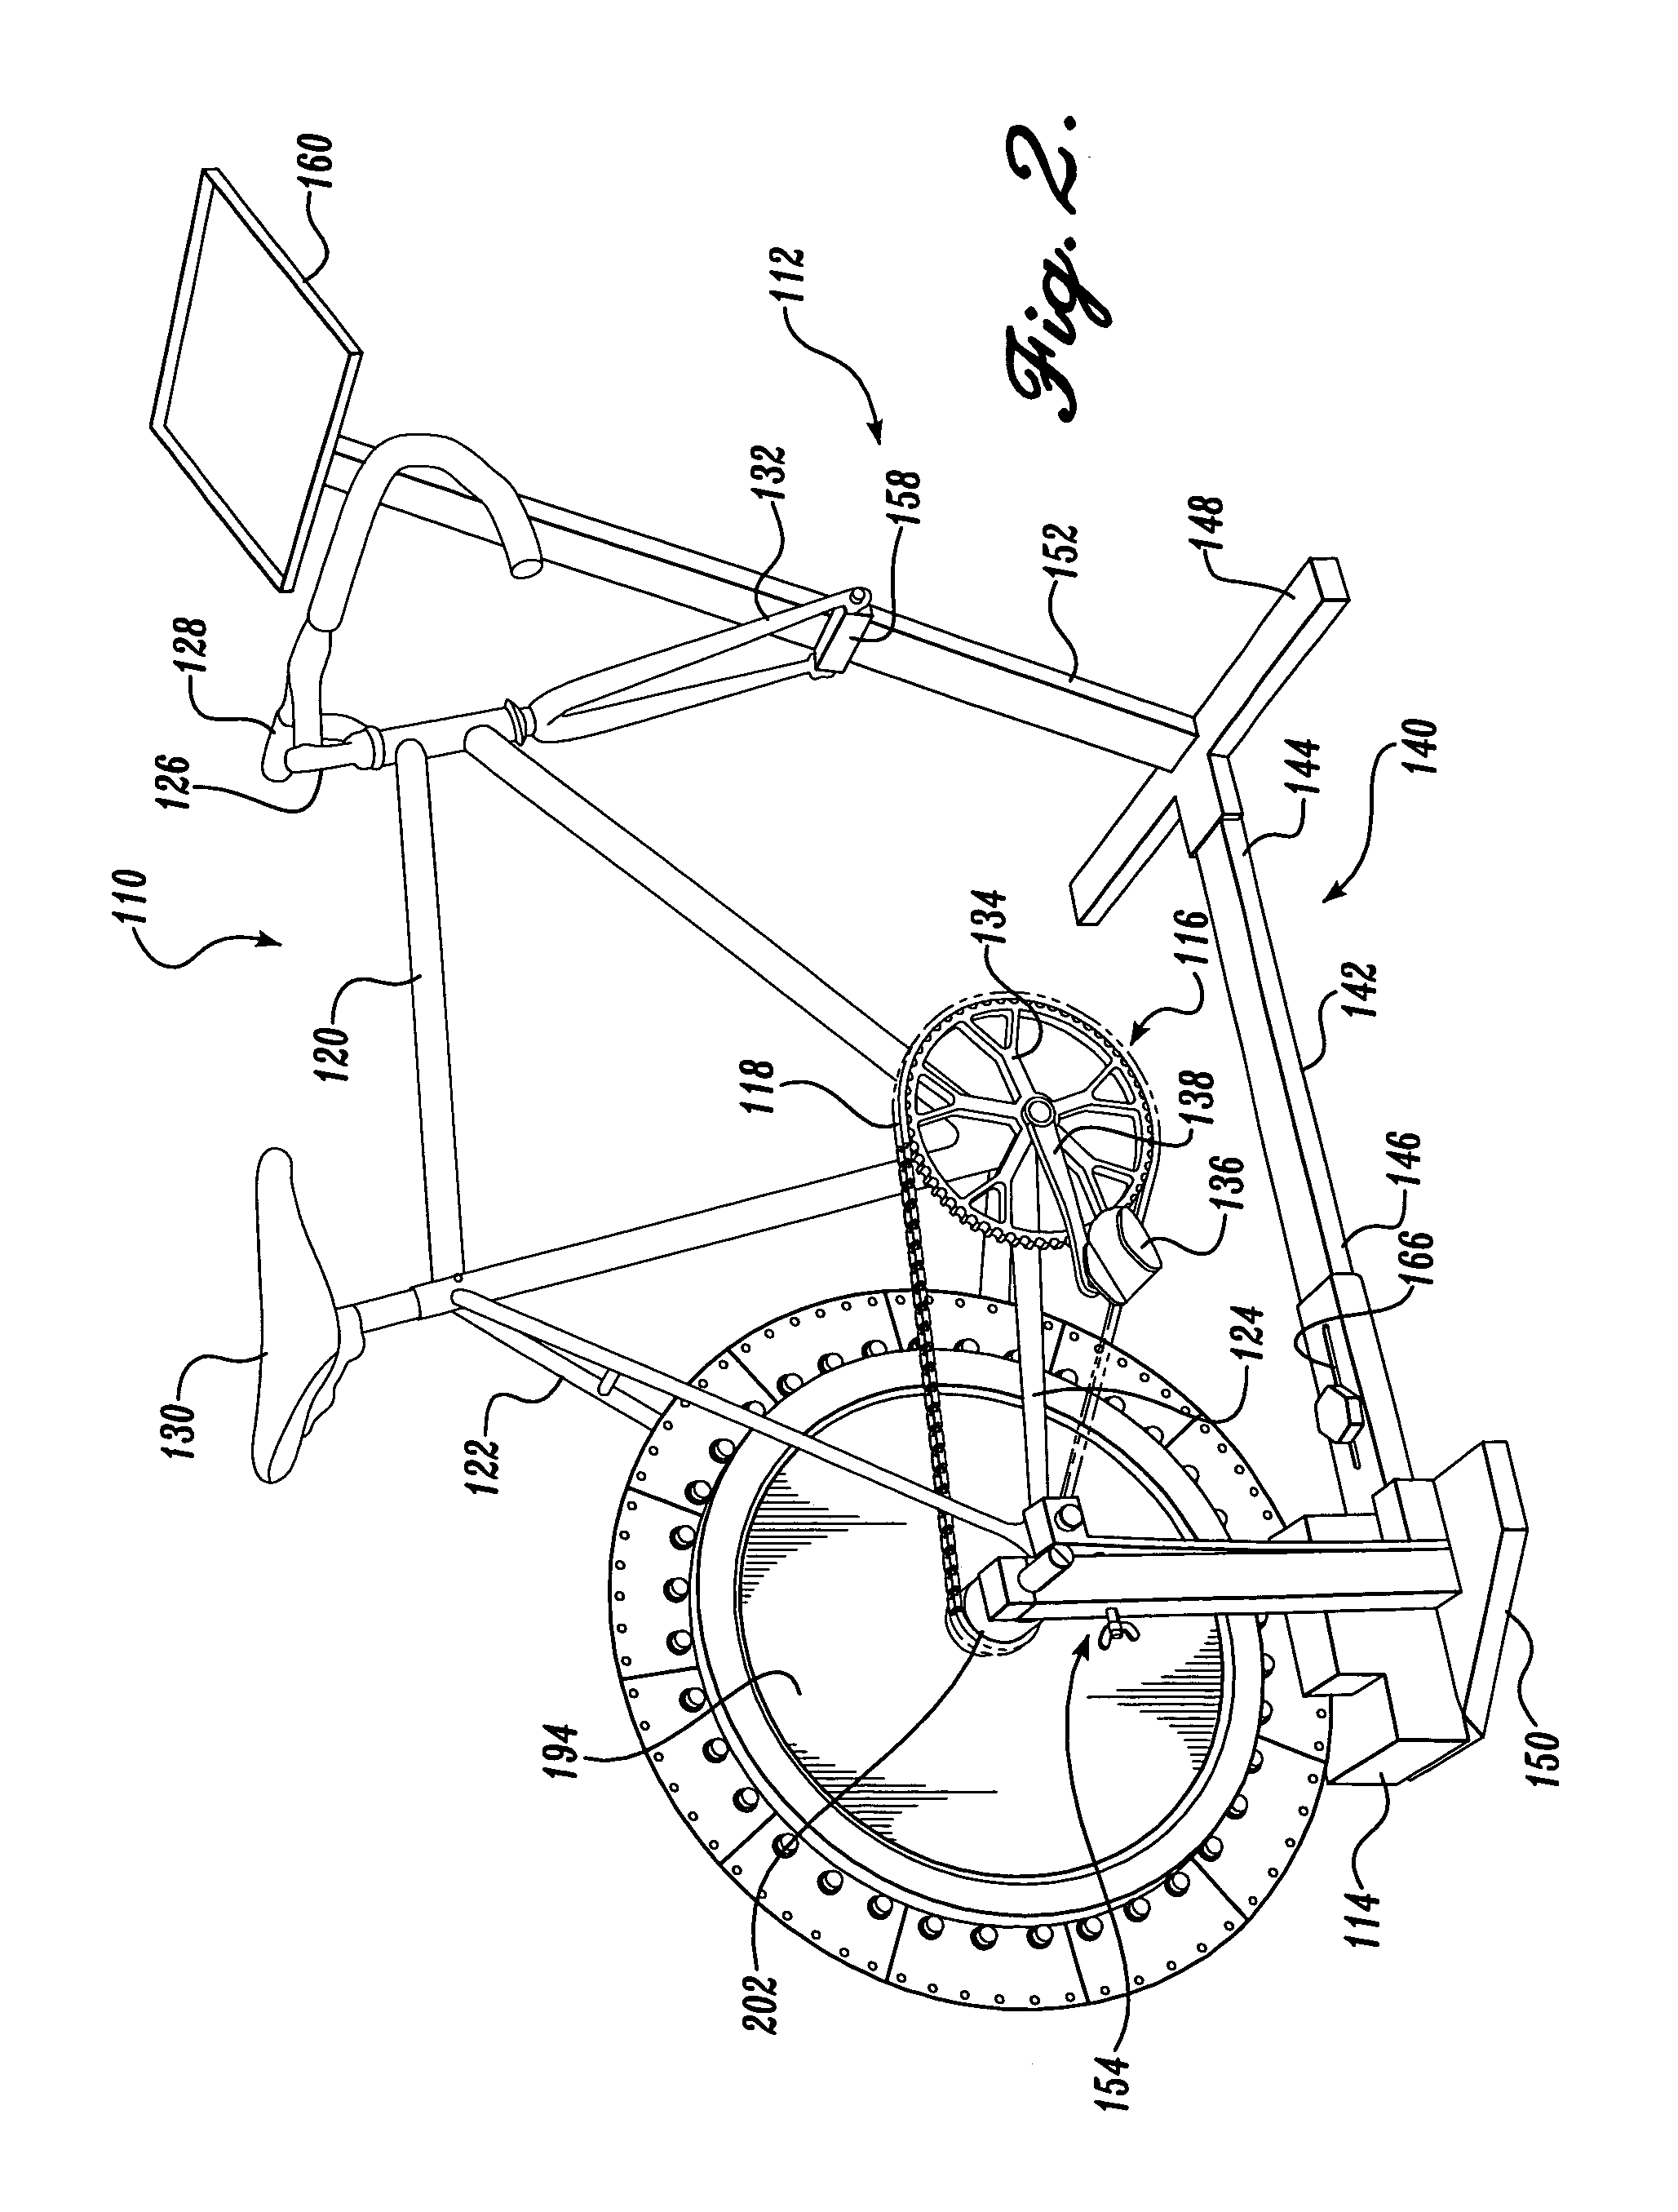 Resistance exercise apparatus and trainer